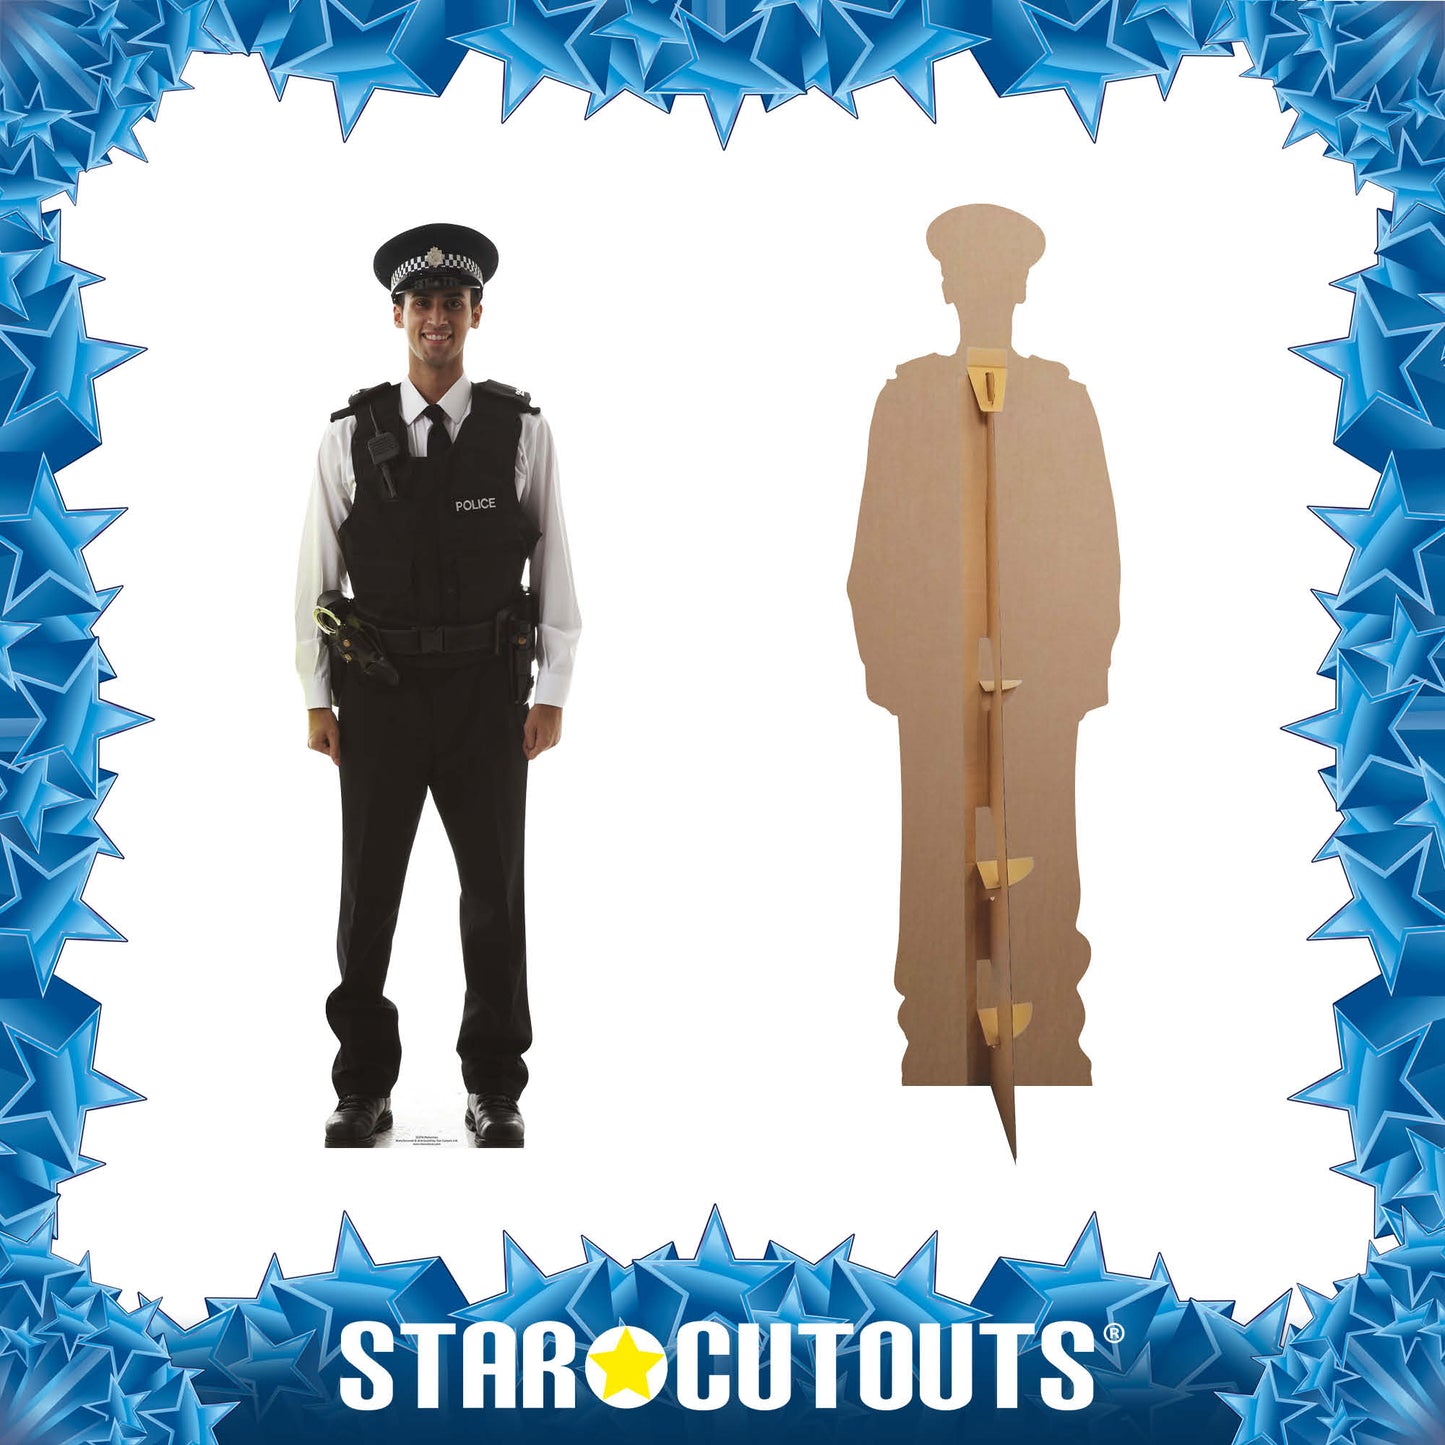 SC076 Policeman Cardboard Cut Out Height 185cm